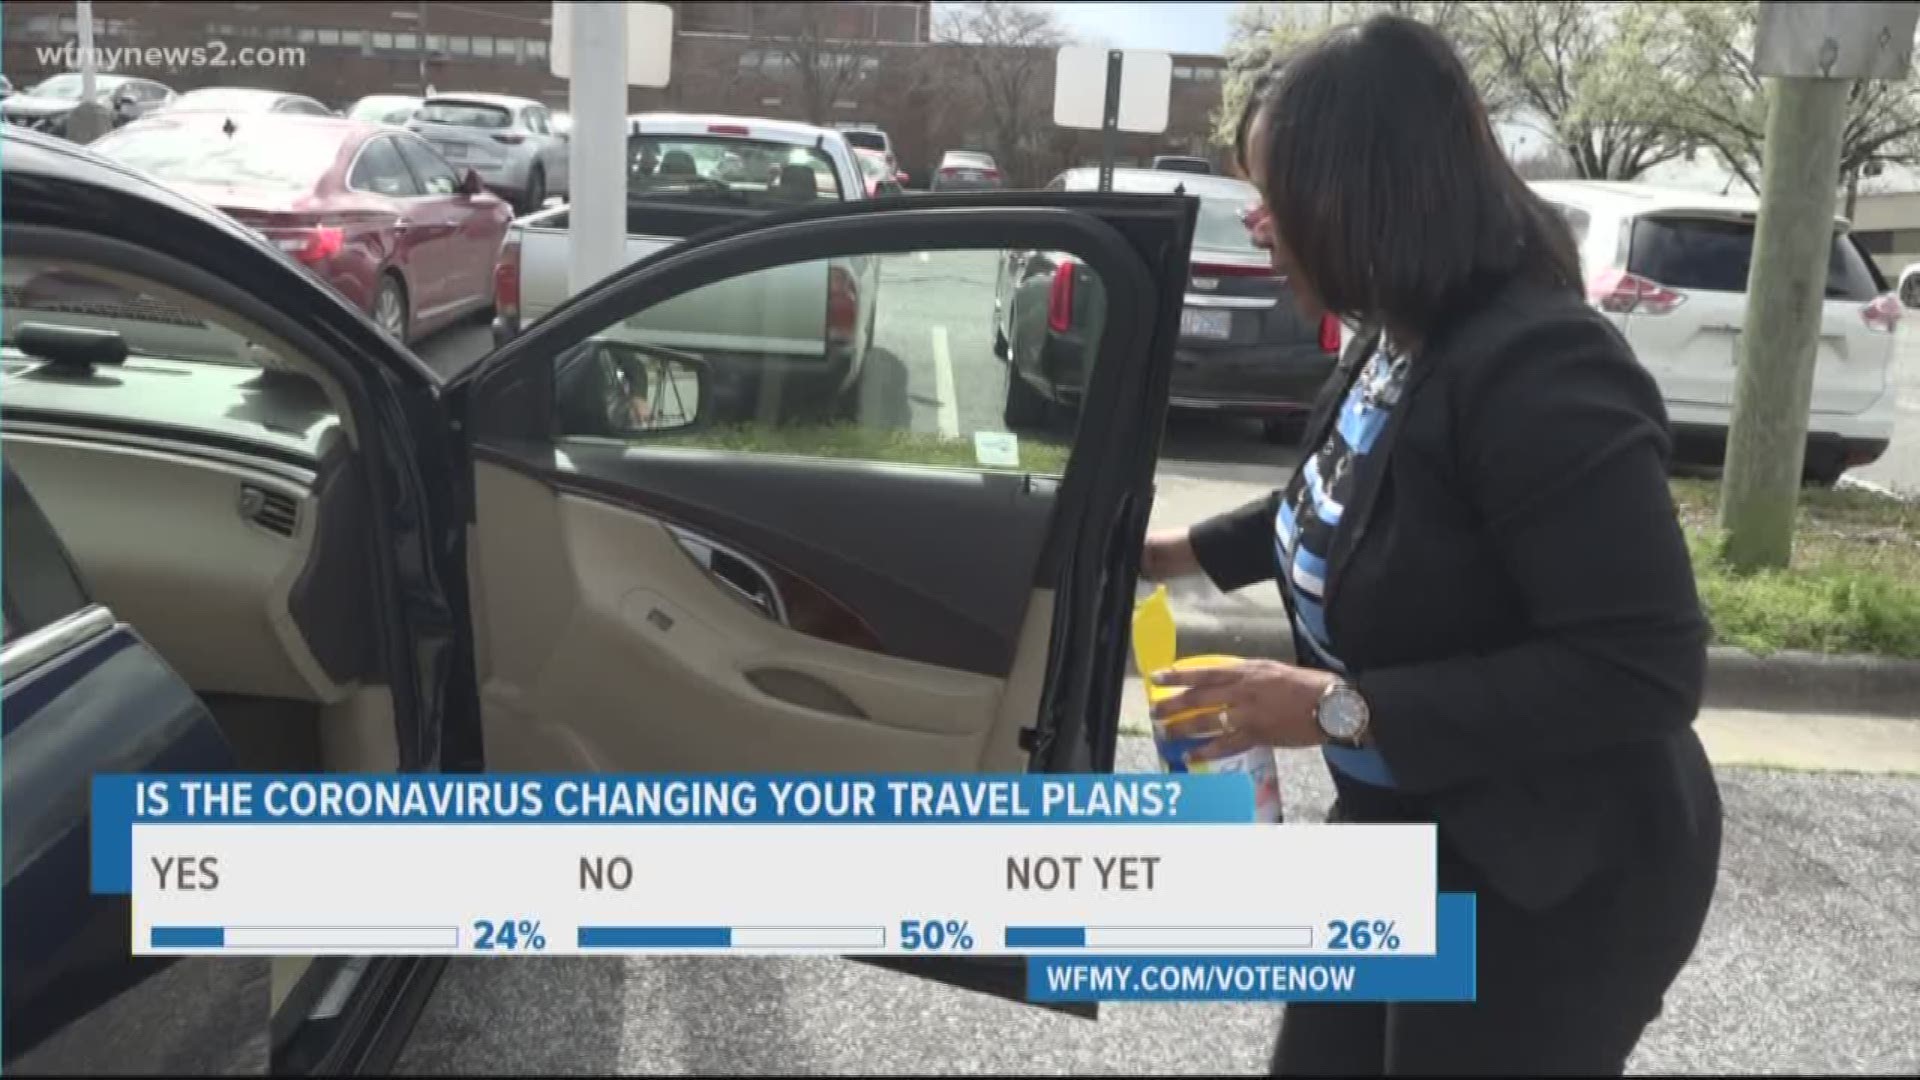 The Coronavirus is causing some worry for travelers, but Uber and Lyft drivers say there's nothing to worry about.